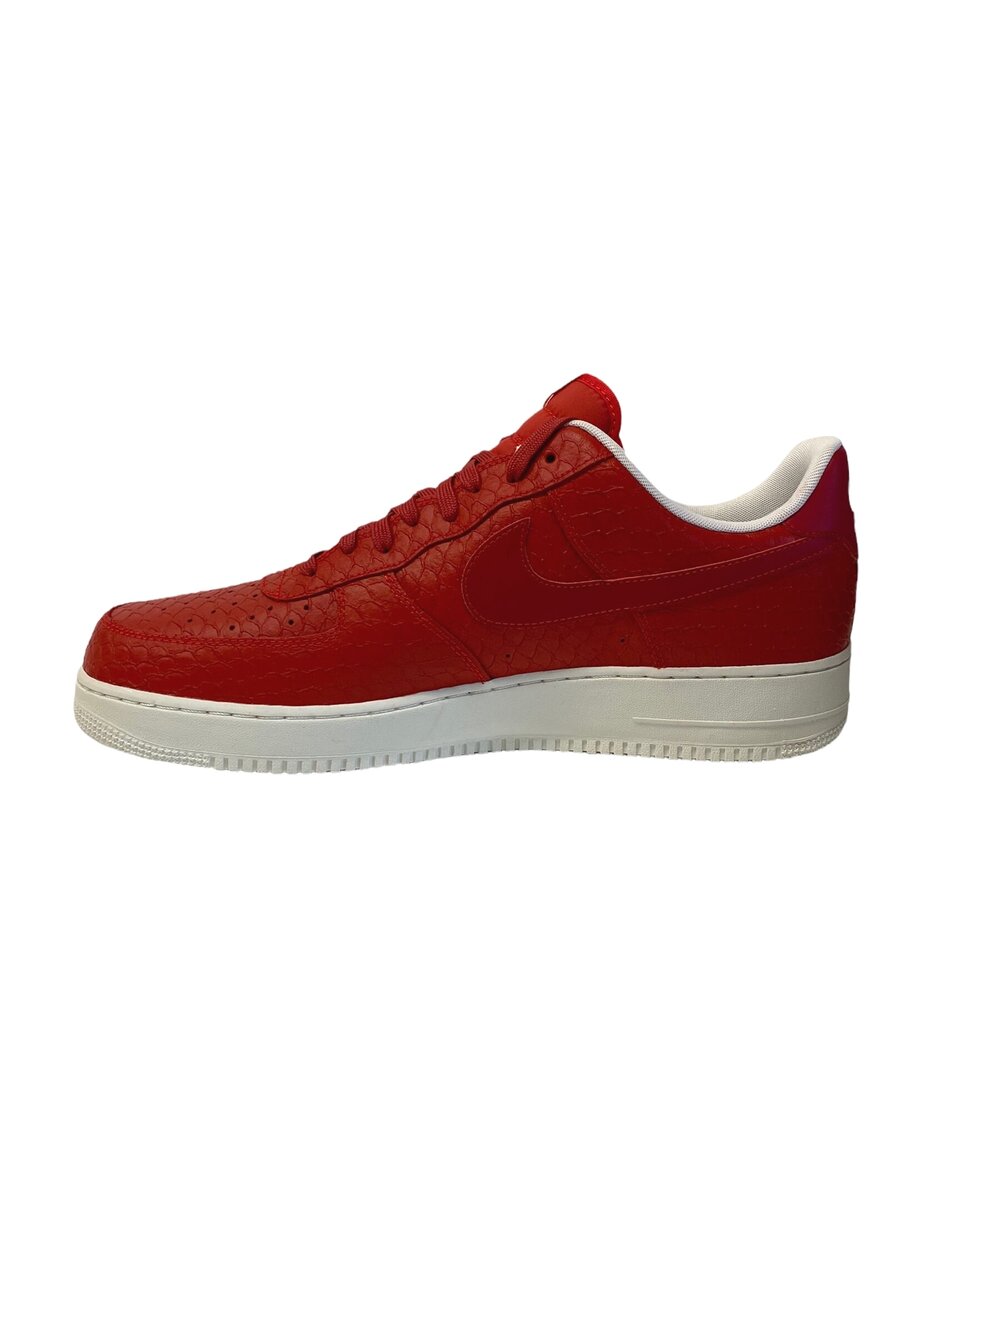 New in Box, Nike Air Force 1 Men's Sneakers, Size 16 — Mercer Island Thrift Shop